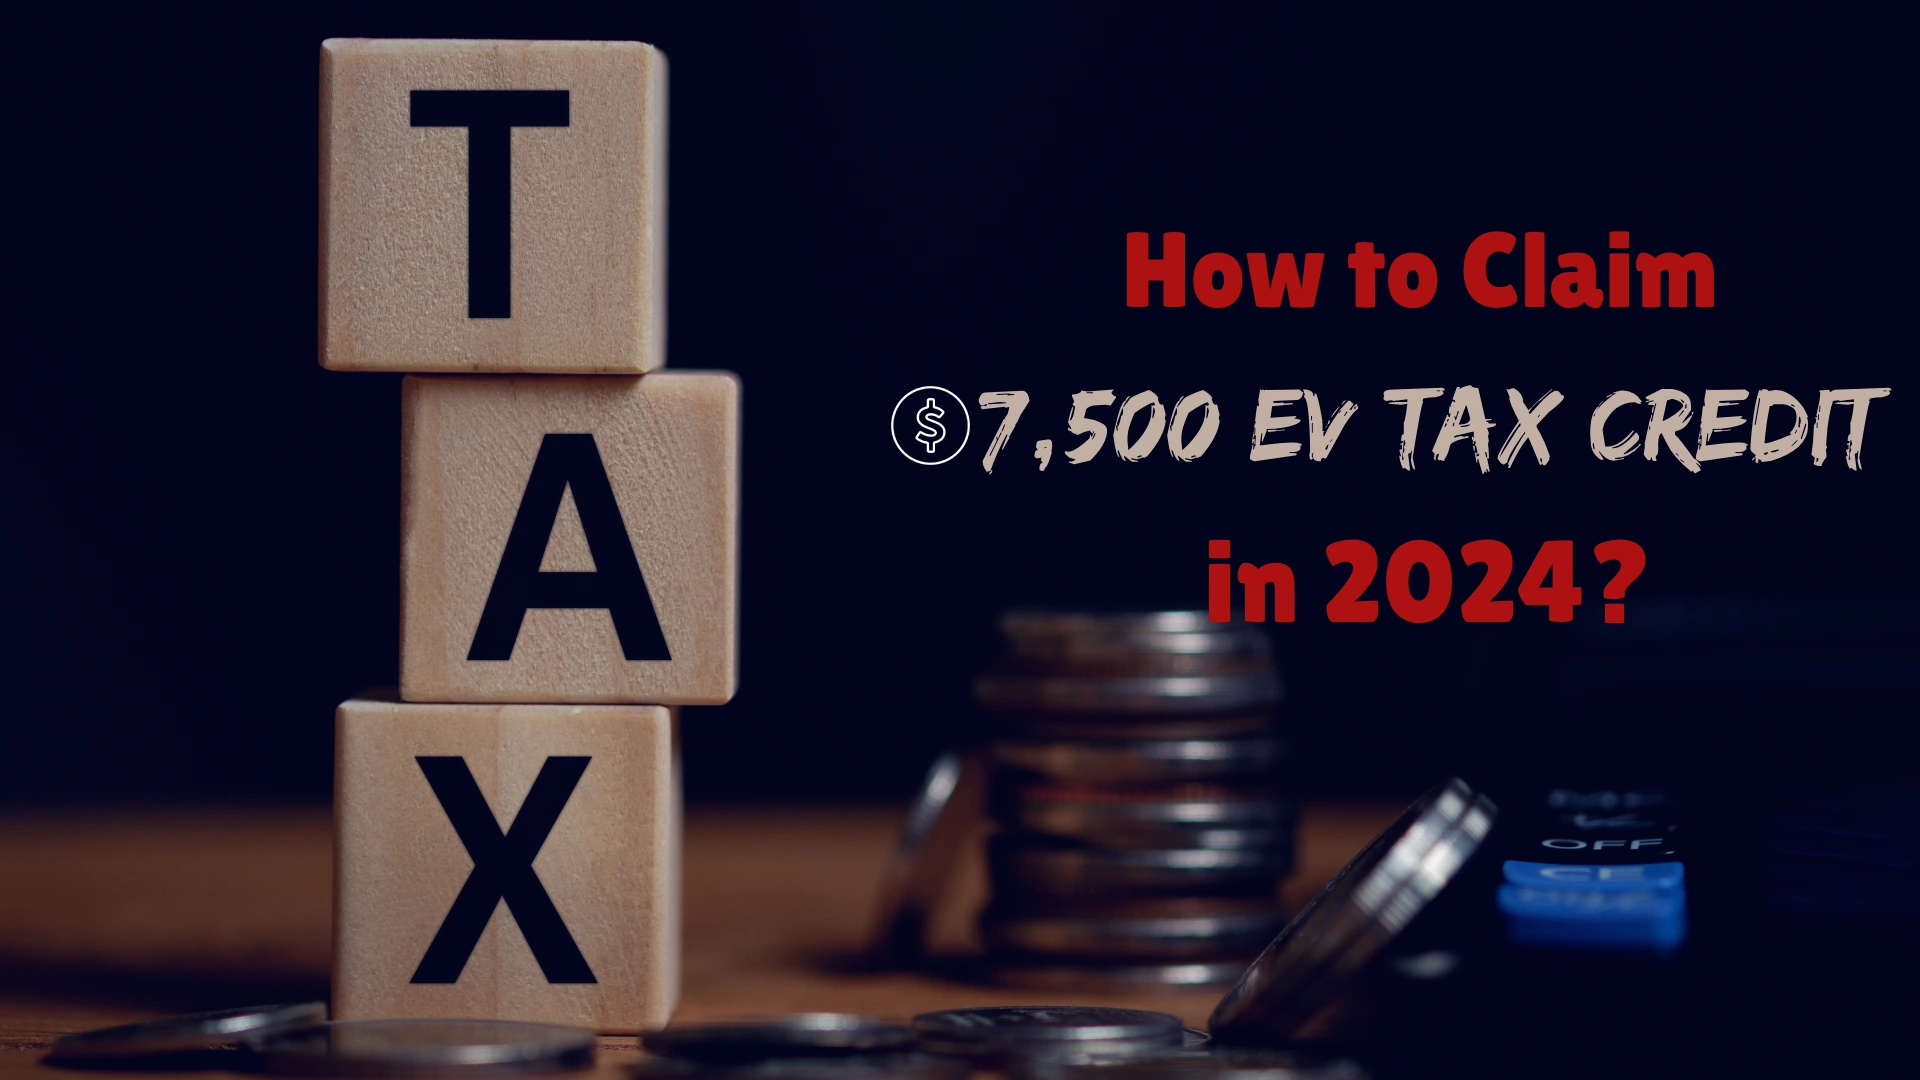 How to Claim $7,500 EV Tax Credit Before the Filing Season?